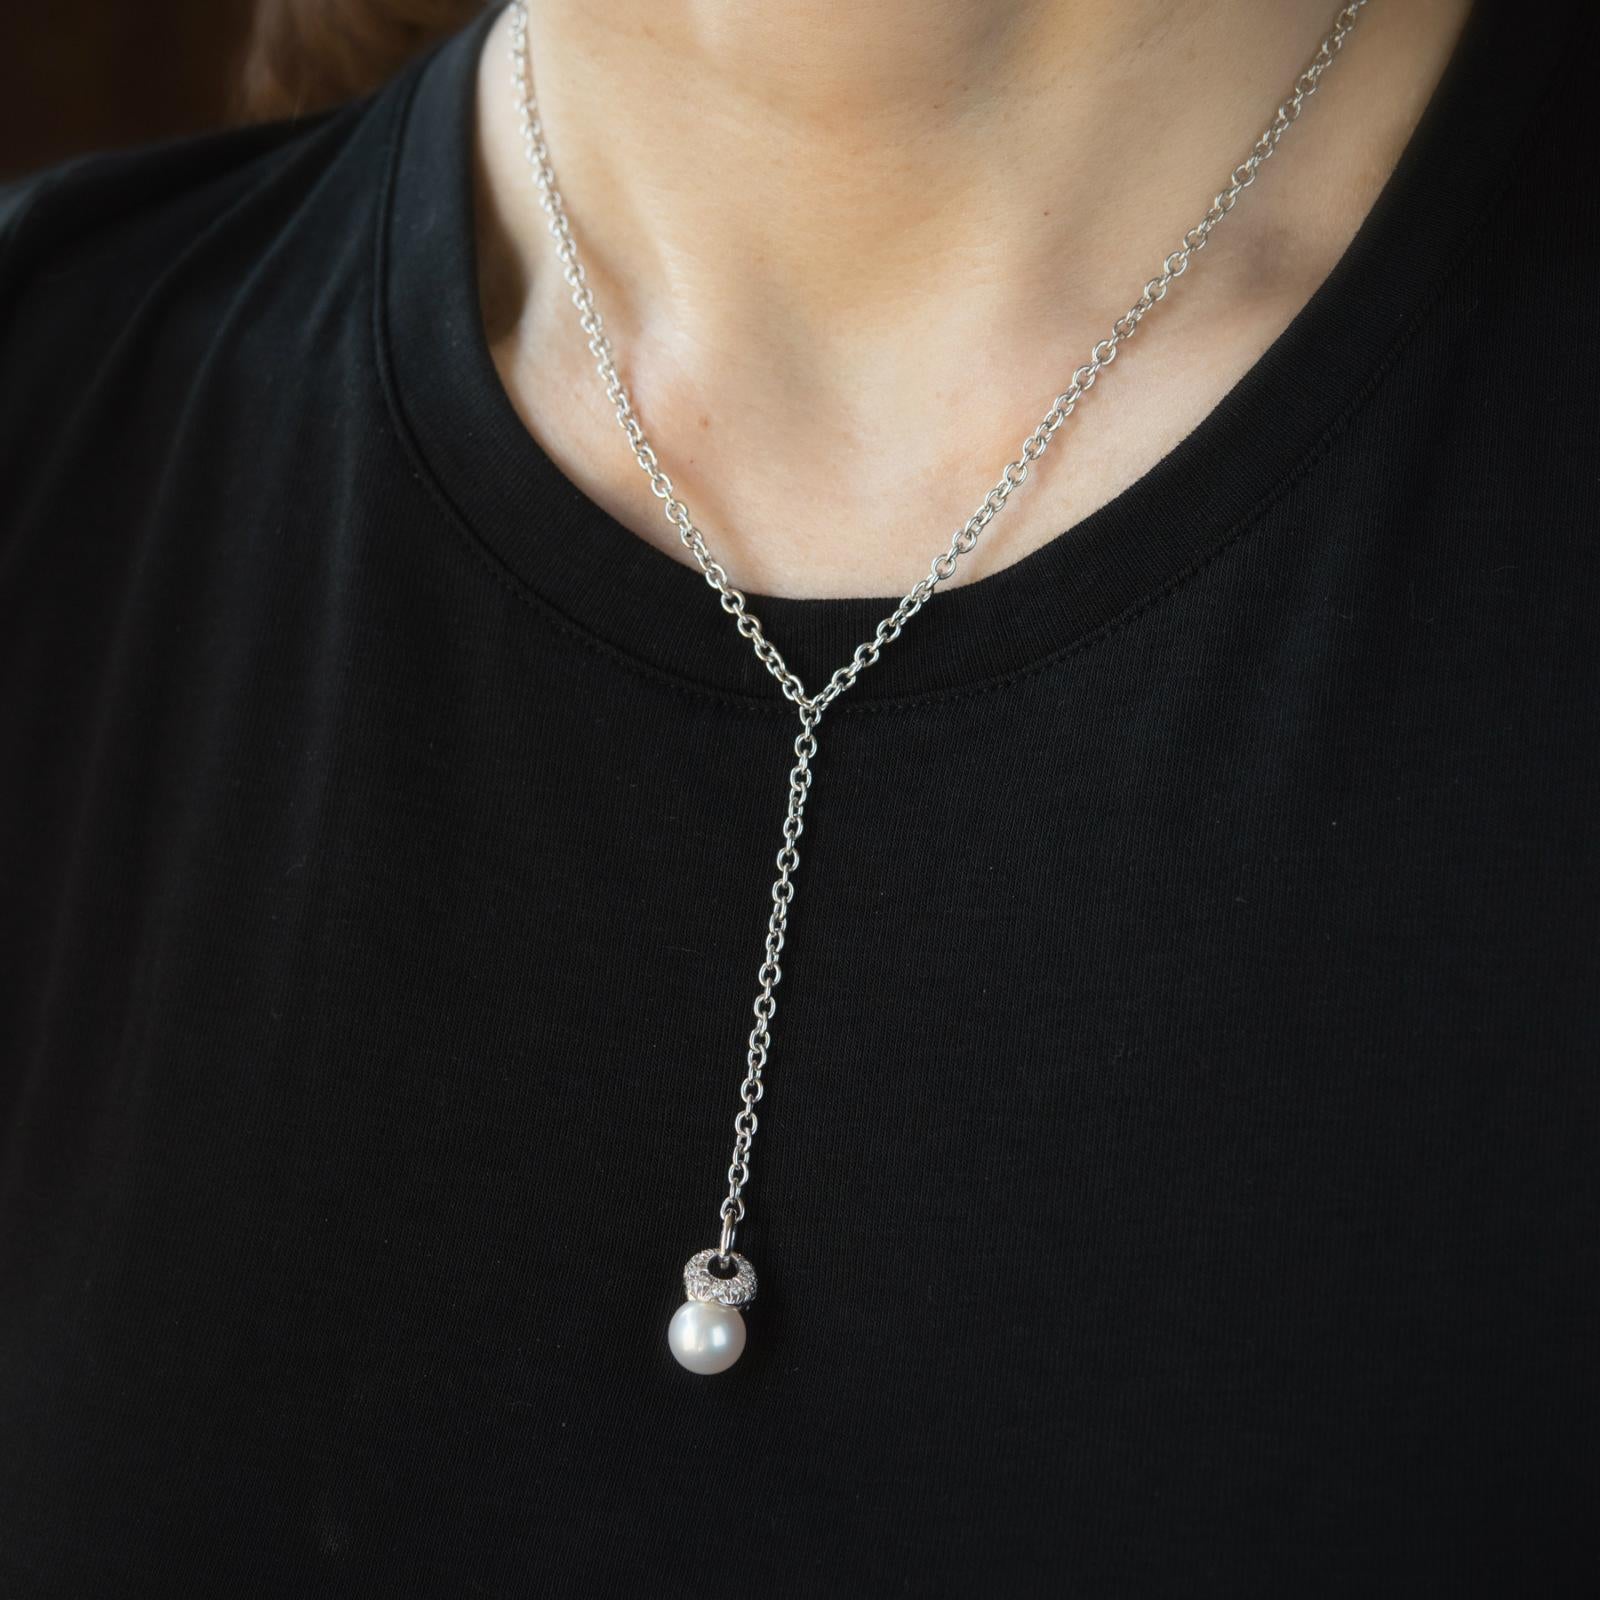 Elegant Mikimoto drop necklace, crafted in 18 karat white gold.  

Mikimoto cultured akoya pearl measures 9mm, accented with an estimated 0.25 carats of round brilliant cut diamonds (estimate at G color and VS2 clarity).

The necklace measures 16